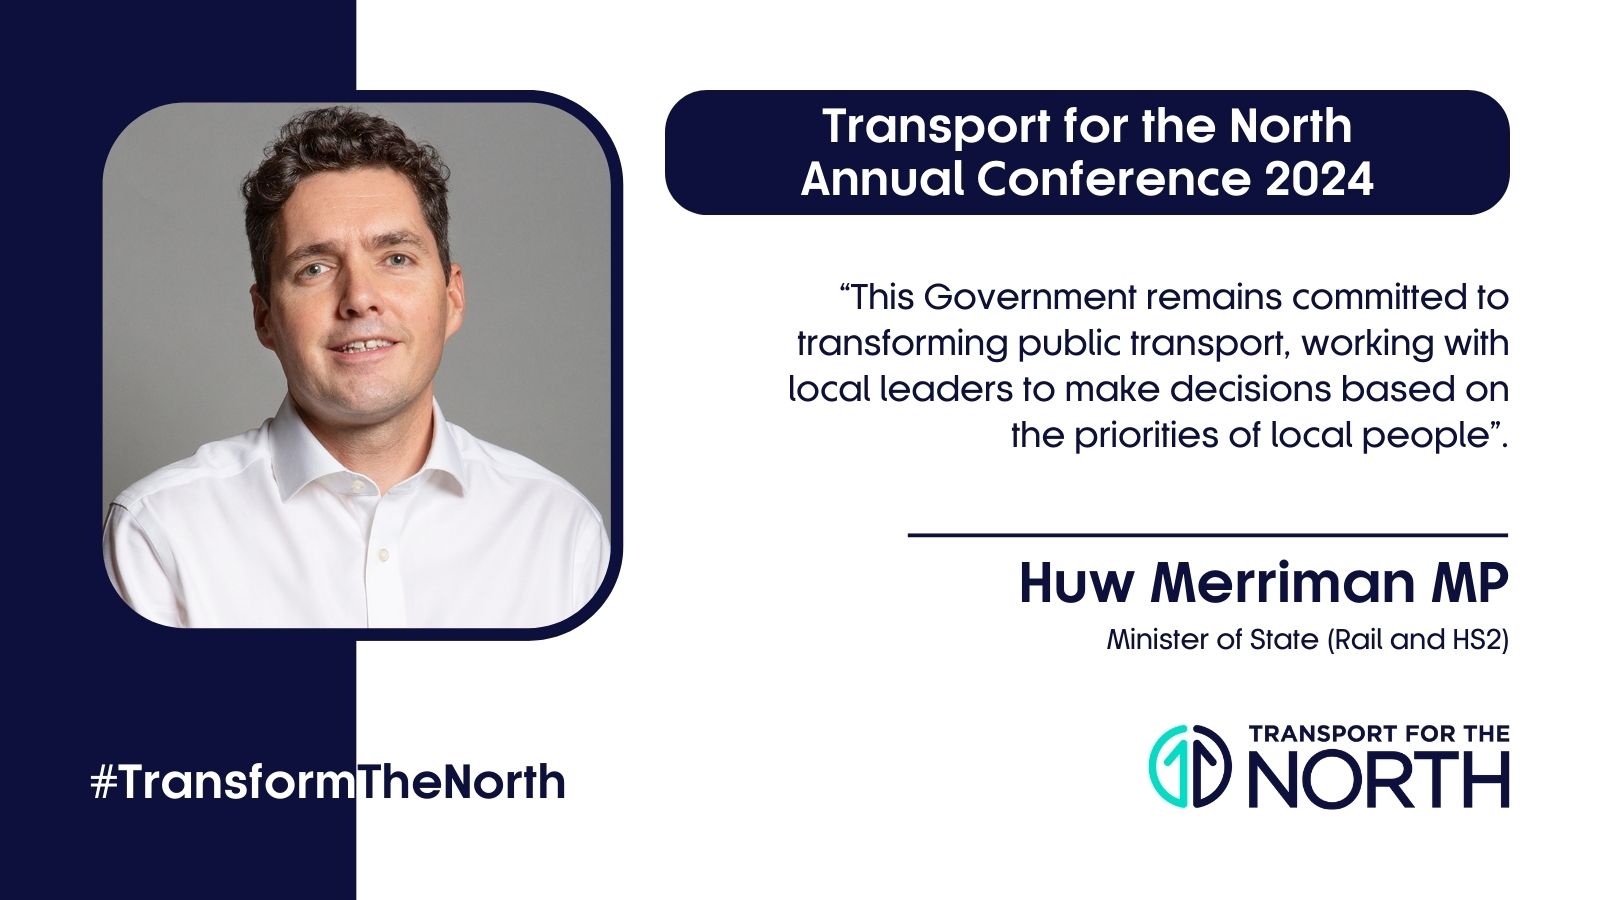 Rail Minister Huw Merriman MP speaks ahead of the 2024 TfN Annual Conference